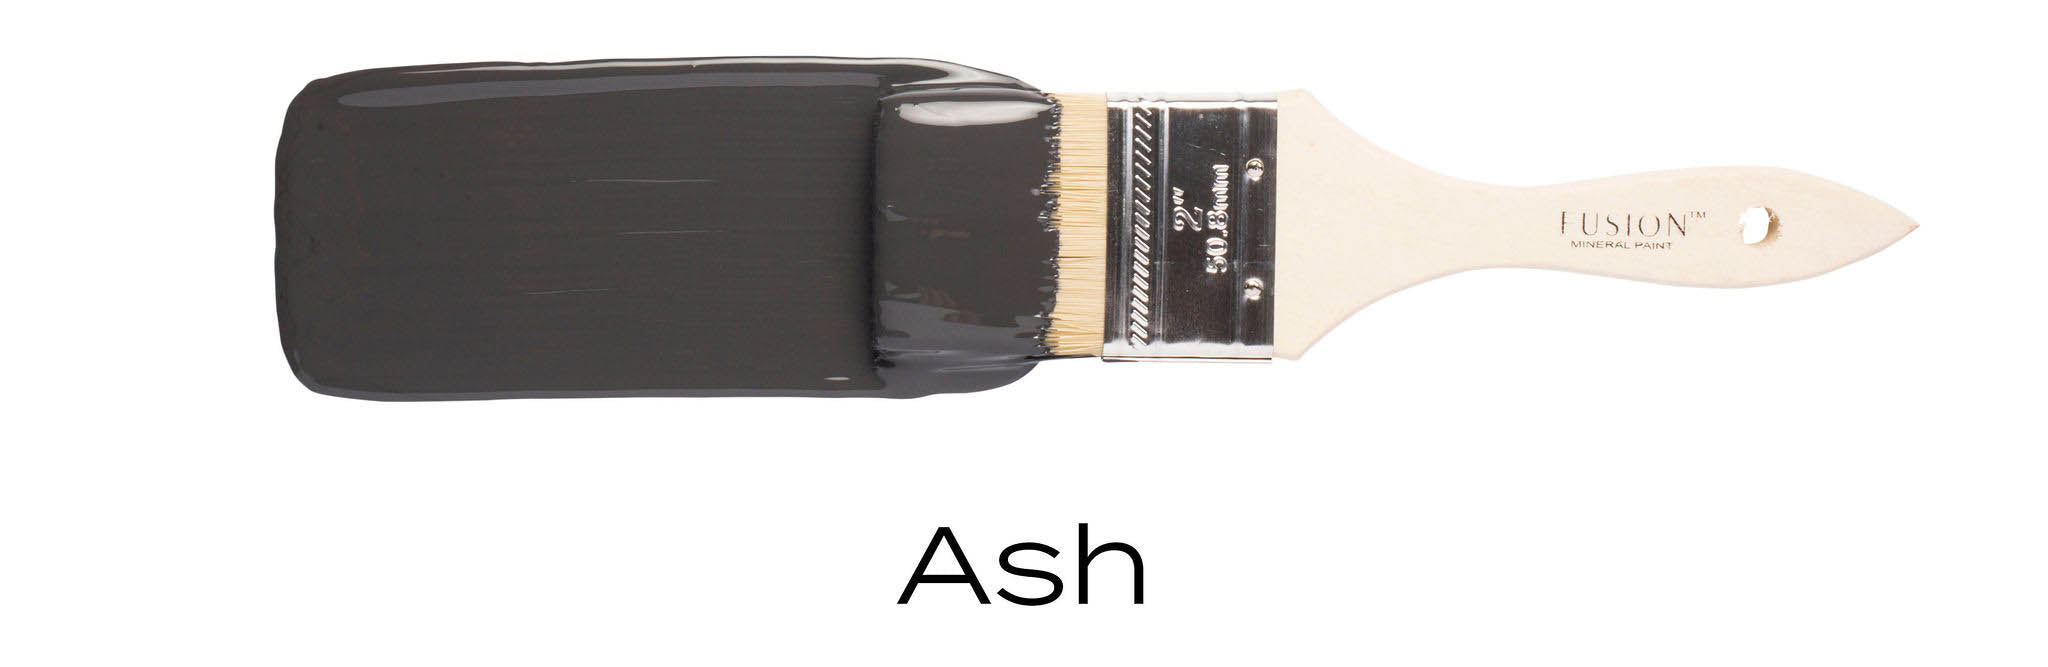 Ash Fusion Mineral Paint Furniture Paint Colour Example, No Prep or top coat needed, UK Stockist